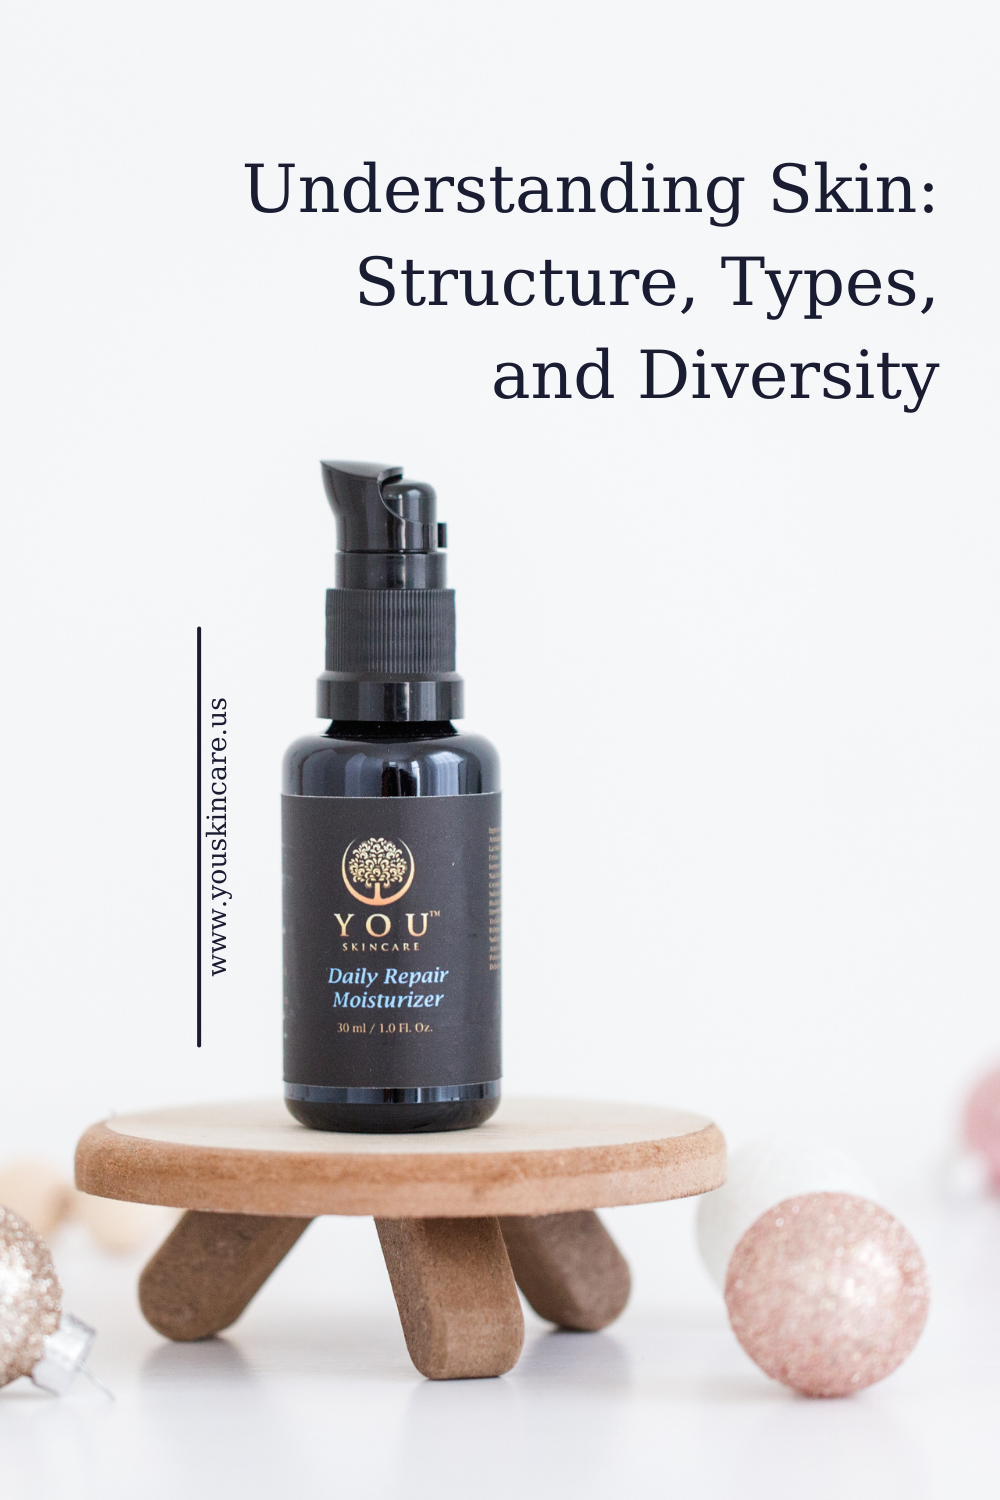 YOU Skincare Understanding Skin structure, type